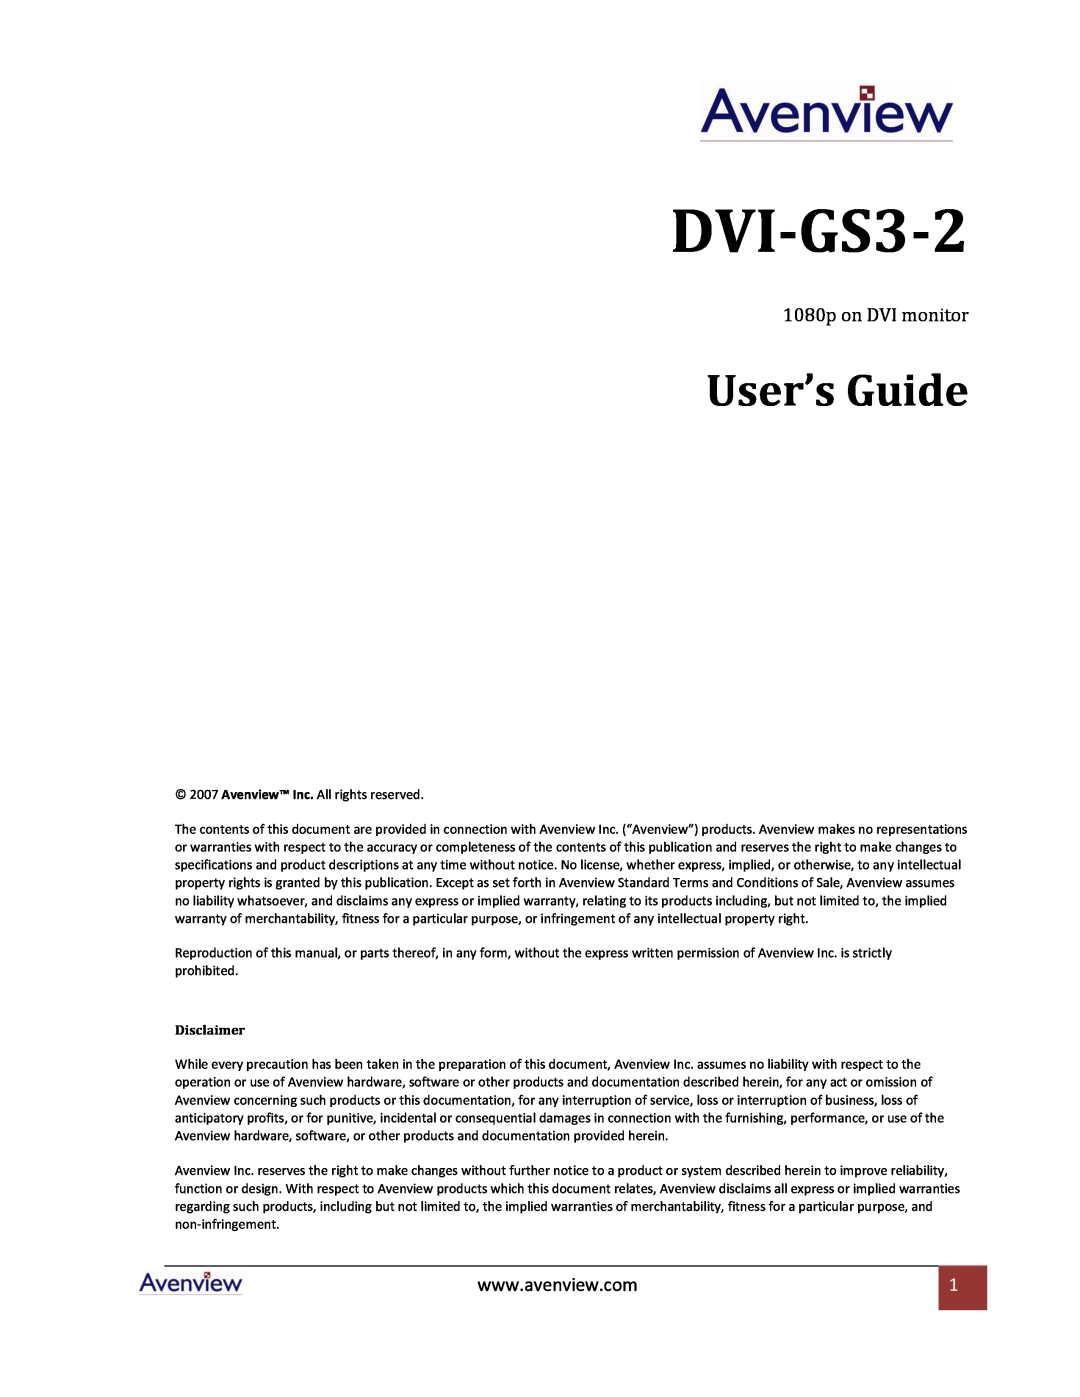 Avenview DVI-GS3-2 specifications User’s Guide, 1080p on DVI monitor, Disclaimer 